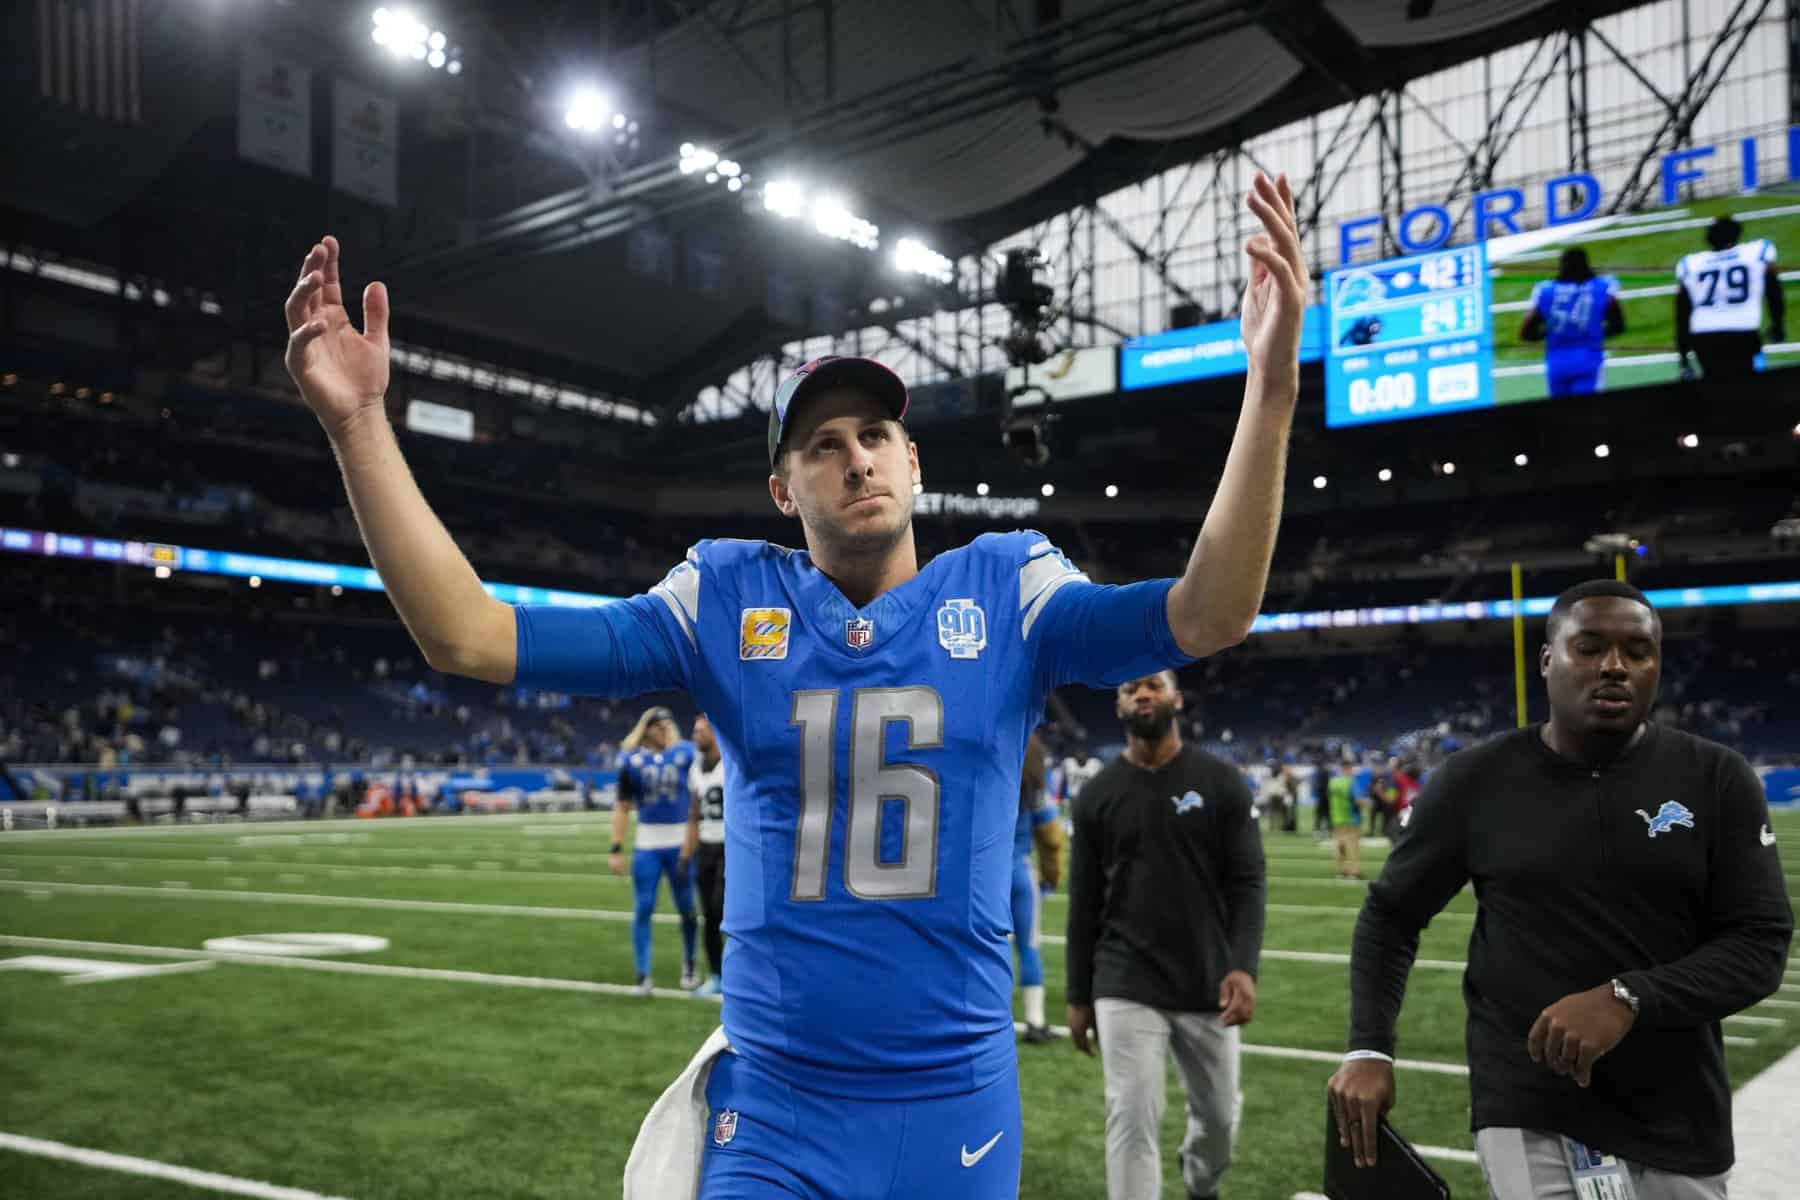 Rams-Lions DFS Picks: Jared Goff in the Ultimate "Remember Me?" Game (Jan 14)